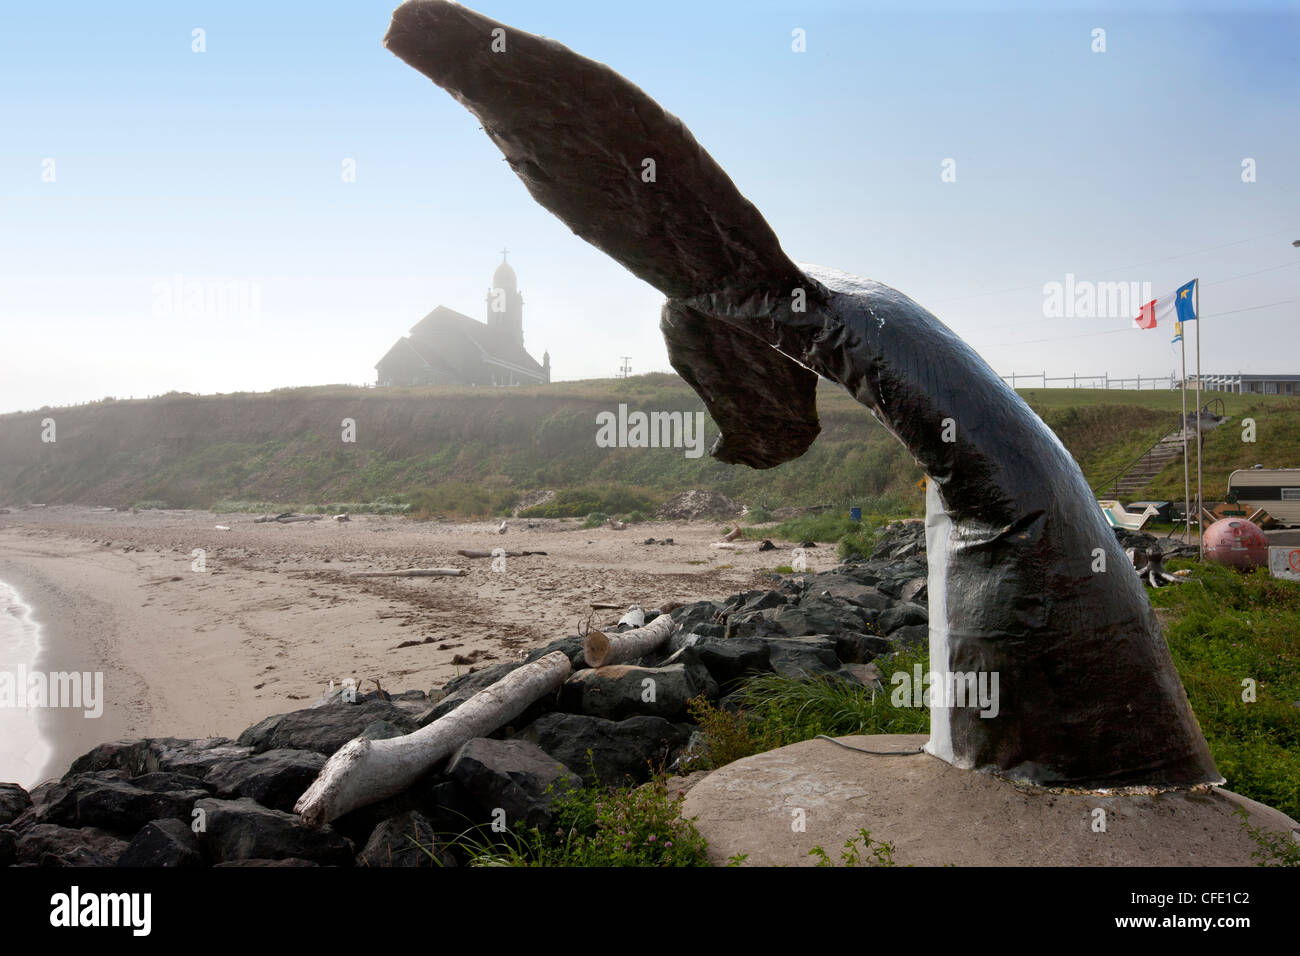 Sculpture of Whale tail, Grande-Anse New Brunswick, Canada Stock Photo